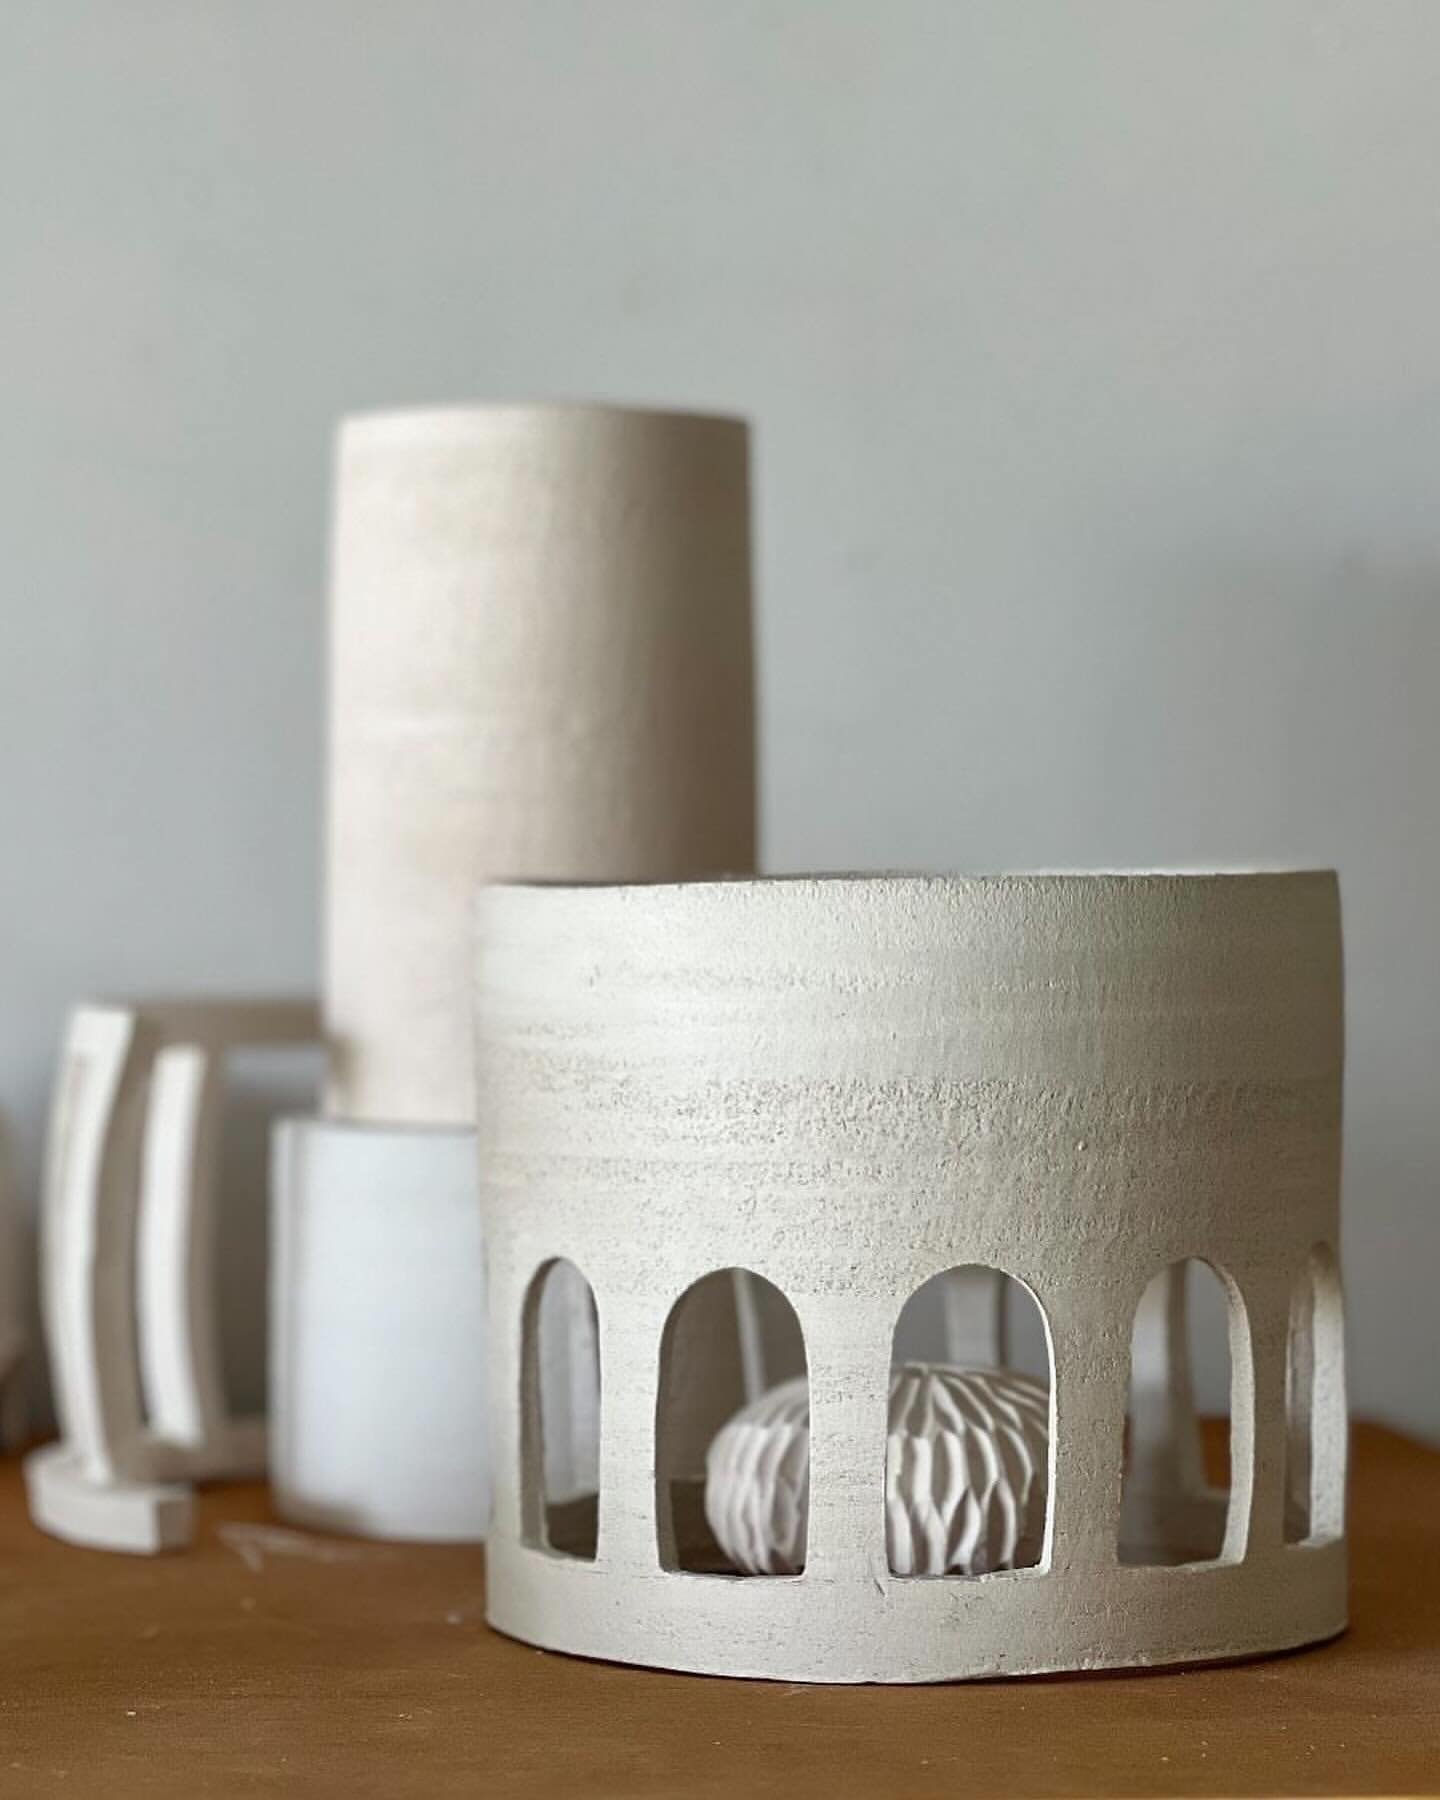 TERM 2 WEEKEND WORKSHOPS

Our Term 2 Weekend Workshops commence in June and are now open for enrolment.

CLAY FOUNDATIONS with JENNY GILL SCHIRMER

DRAWING FROM NATURE&nbsp;with SHARON MUIR

ABSTRACTION&nbsp;&nbsp;with CALEB REID

PROFESSIONAL PRACTI